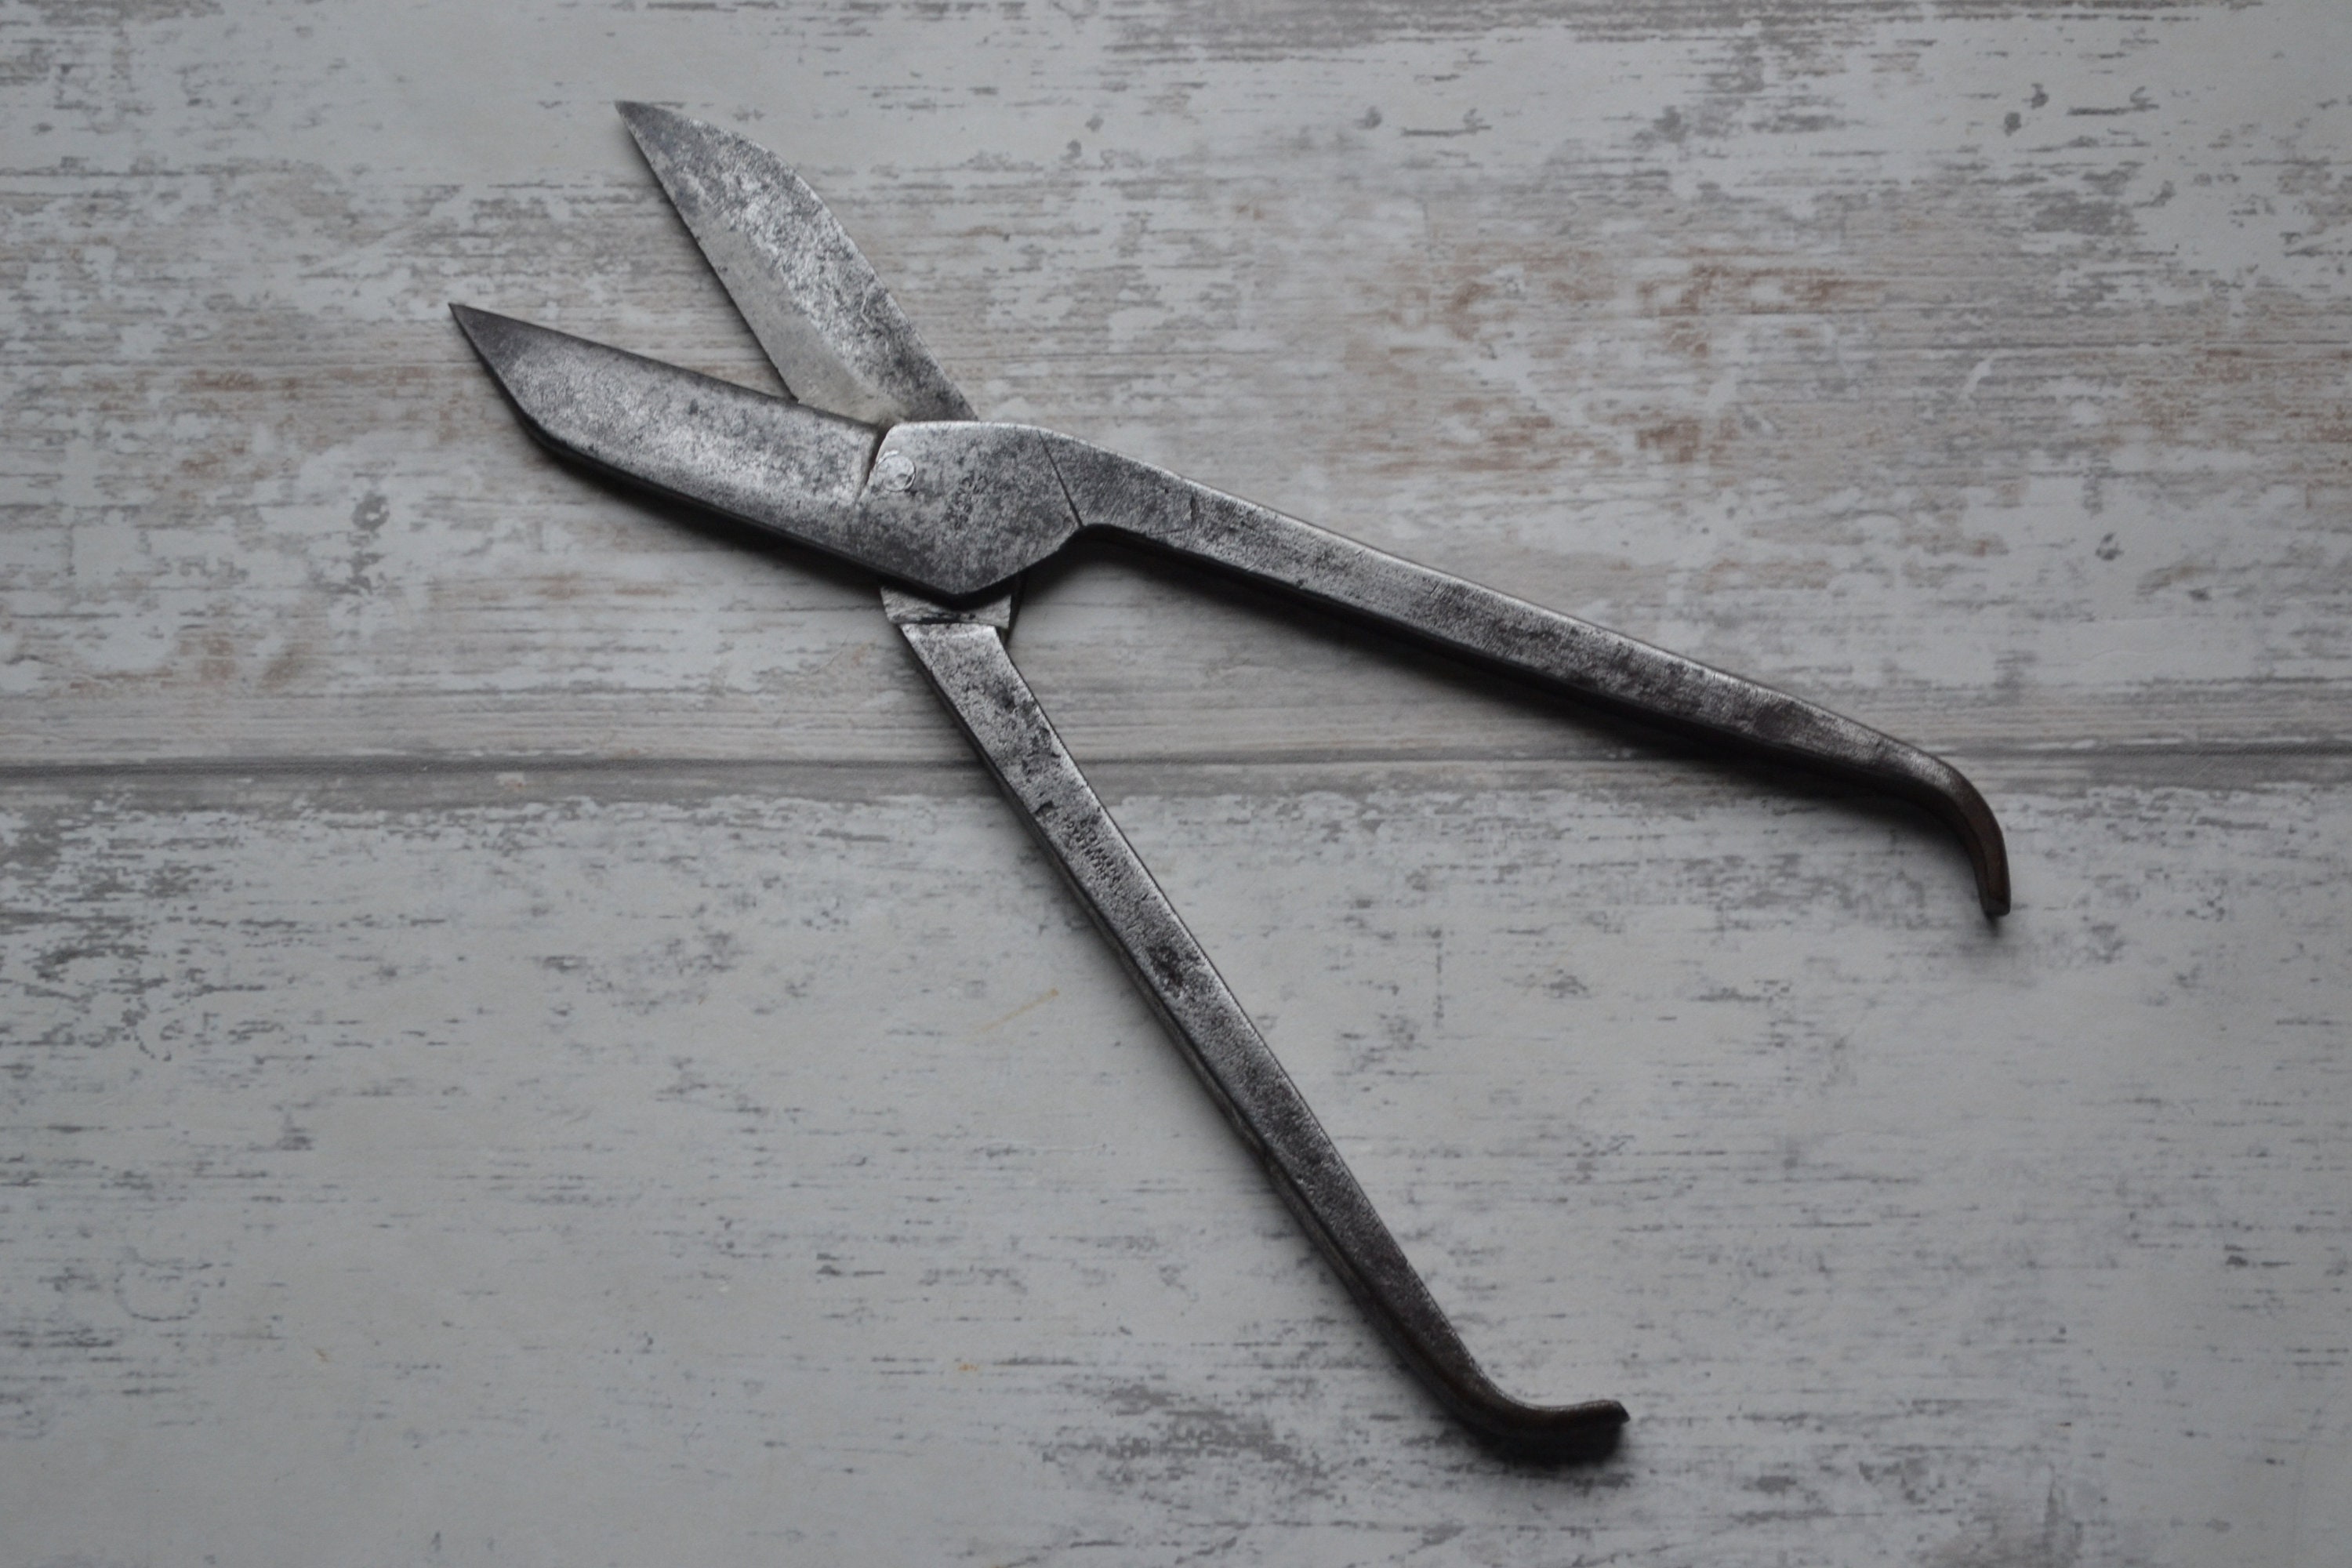 TIN SNIPS PAIR OF VINTAGE METAL SHEARS #9 WISS LARGE & SMALL